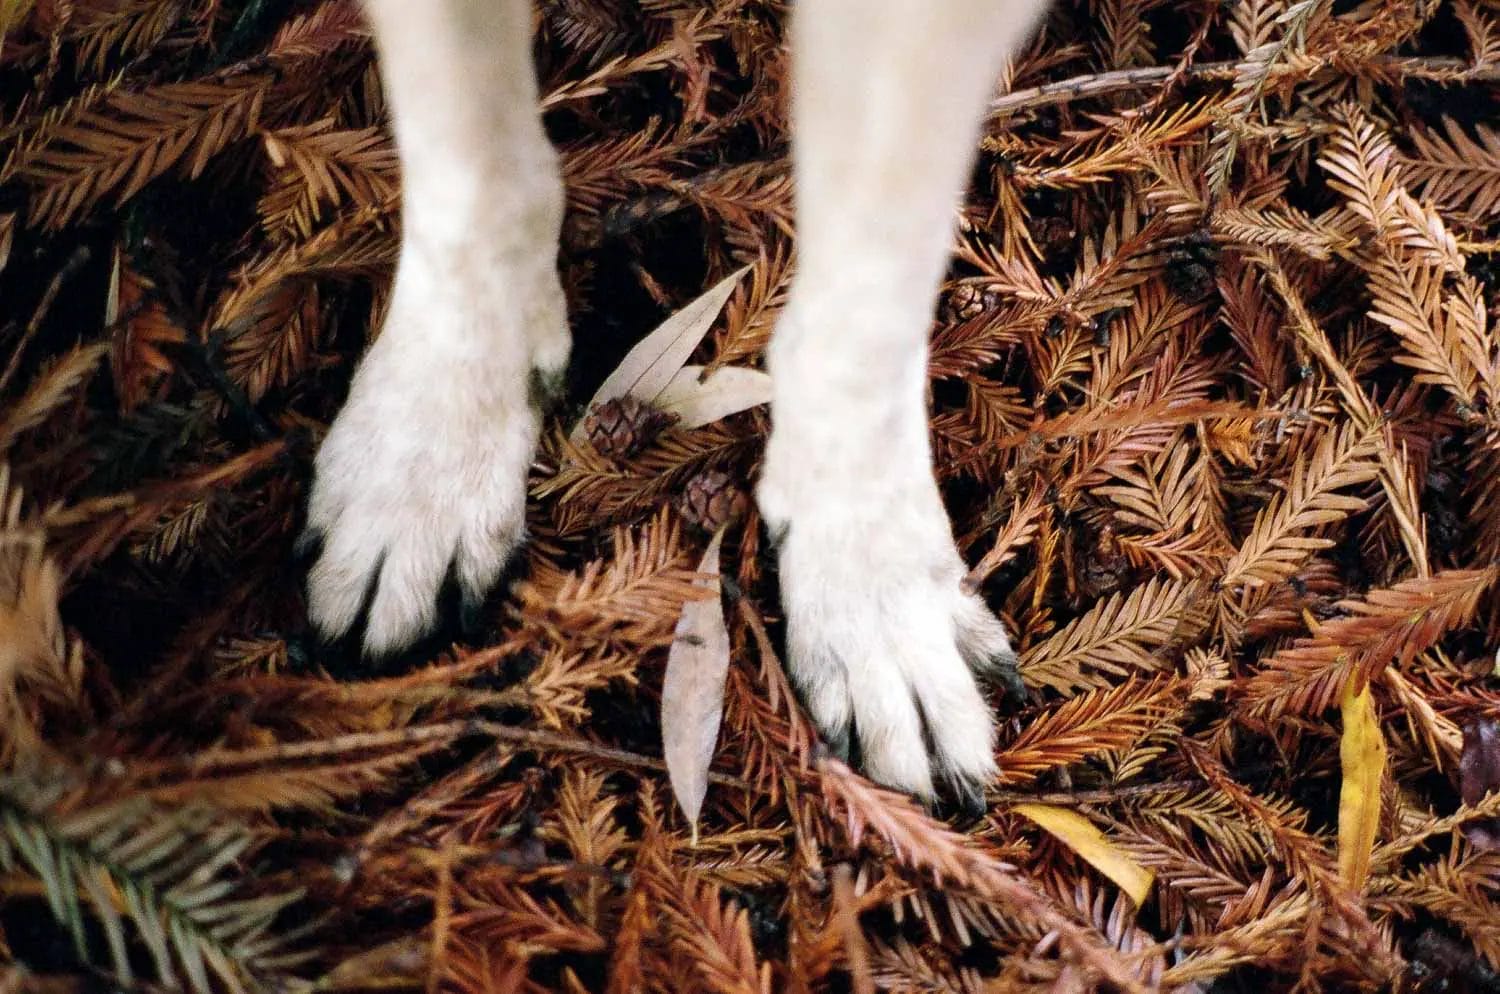 Dog's paws standing on a bed of autumn leaves.